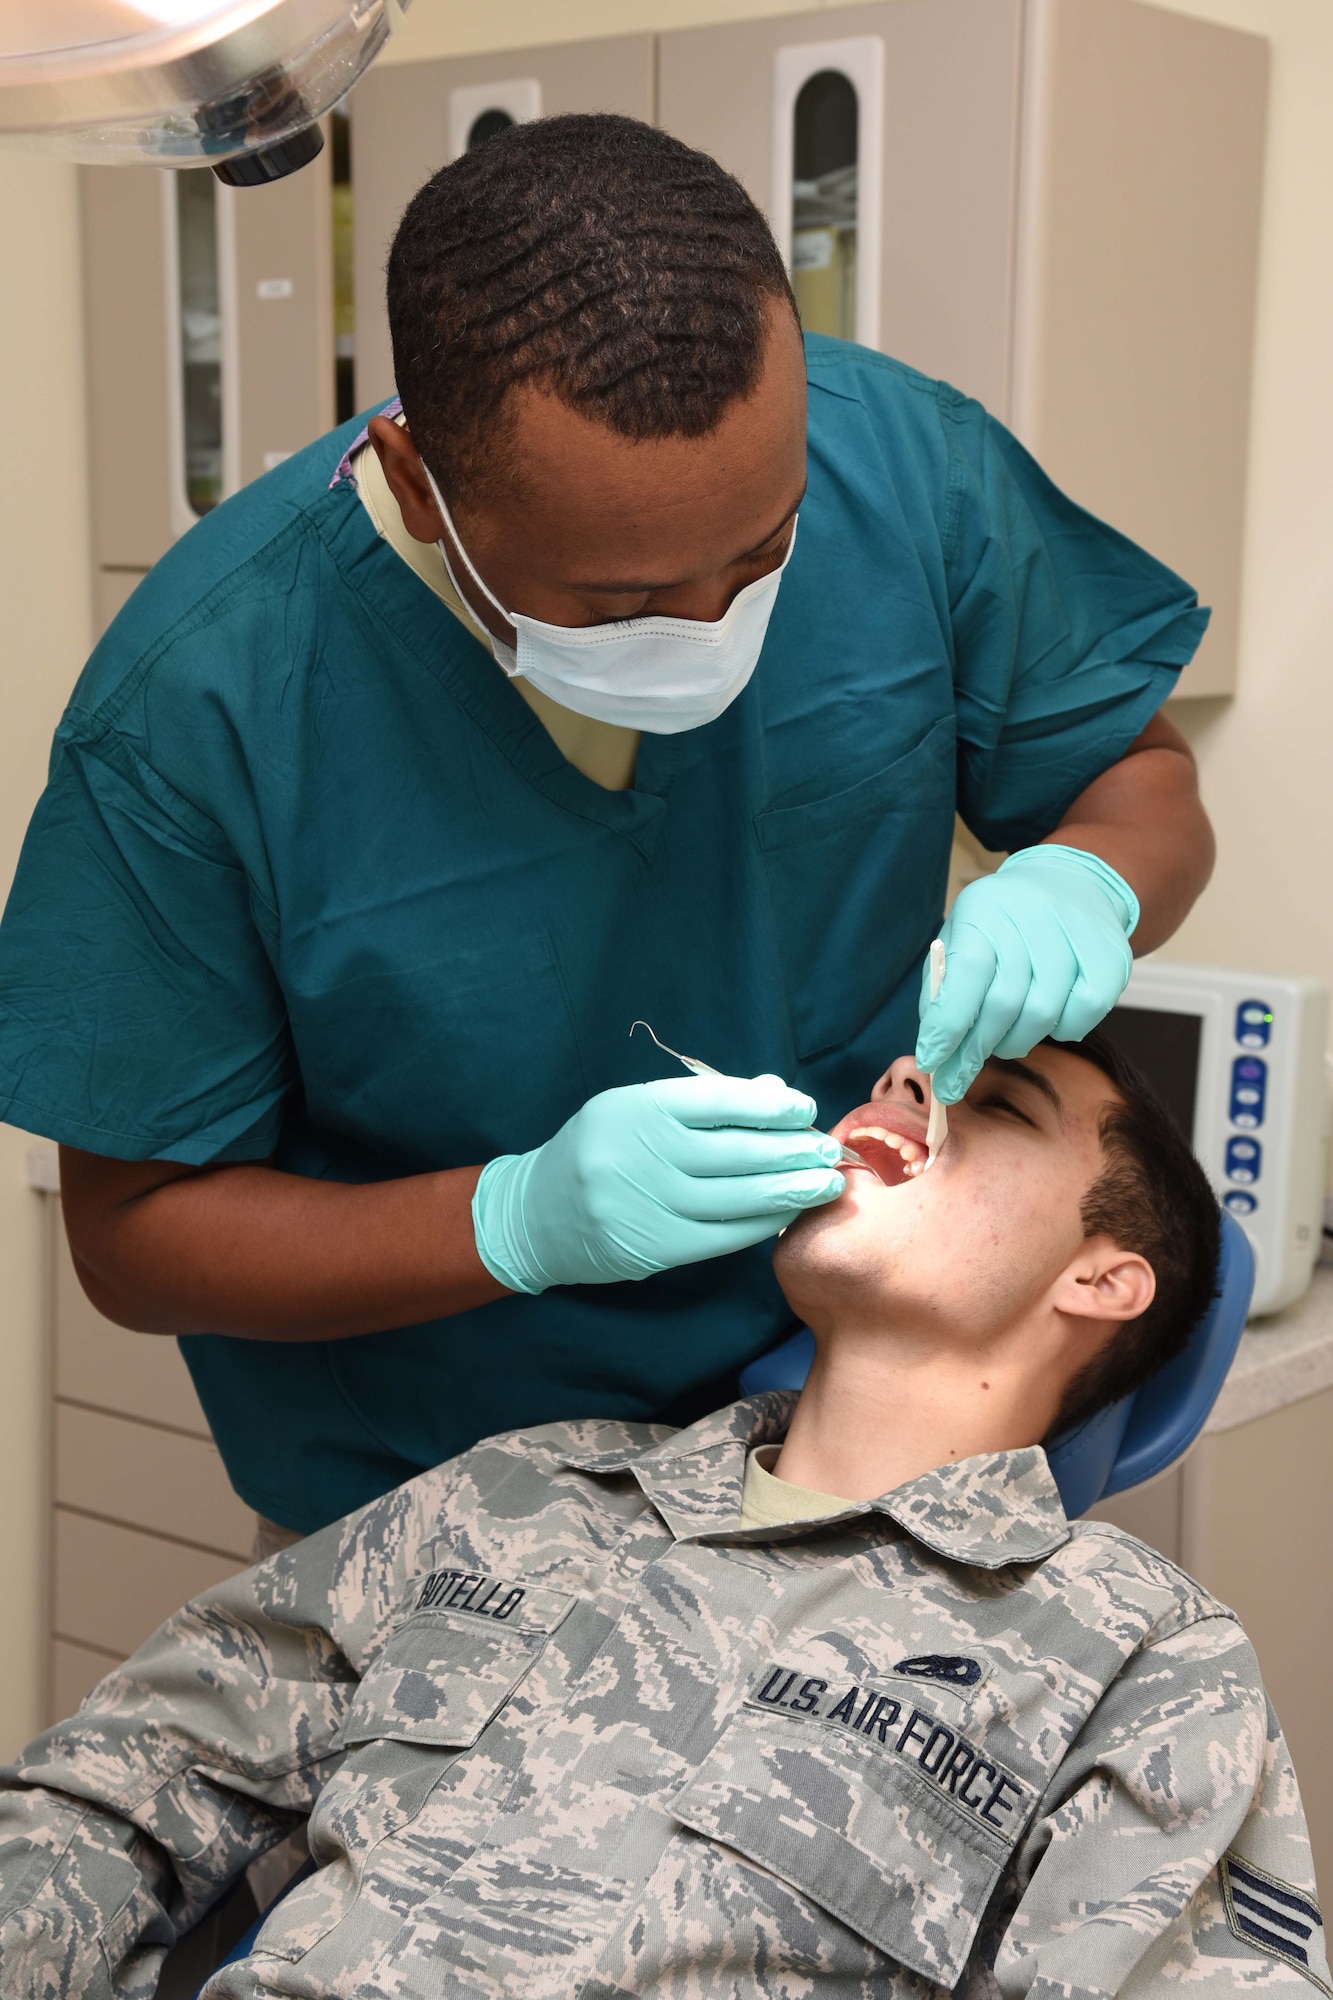 Lt. Col. Jeffrey Brown, 403rd Aeromedical Staging Squadron chief dental officer, performs a routine dental exam on Senior Airman Cristian Botello, 403rd Aerospace Maintenance Squadron aerospace propulsion journeyman Feb. 10 at Keesler Air Force Base, Mississippi. One of the roles of ASTS is to make sure that the wing’s Citizen Airmen are healthy and fit for service worldwide. (U.S. Air Force photo/Tech. Sgt. Ryan Labadens)